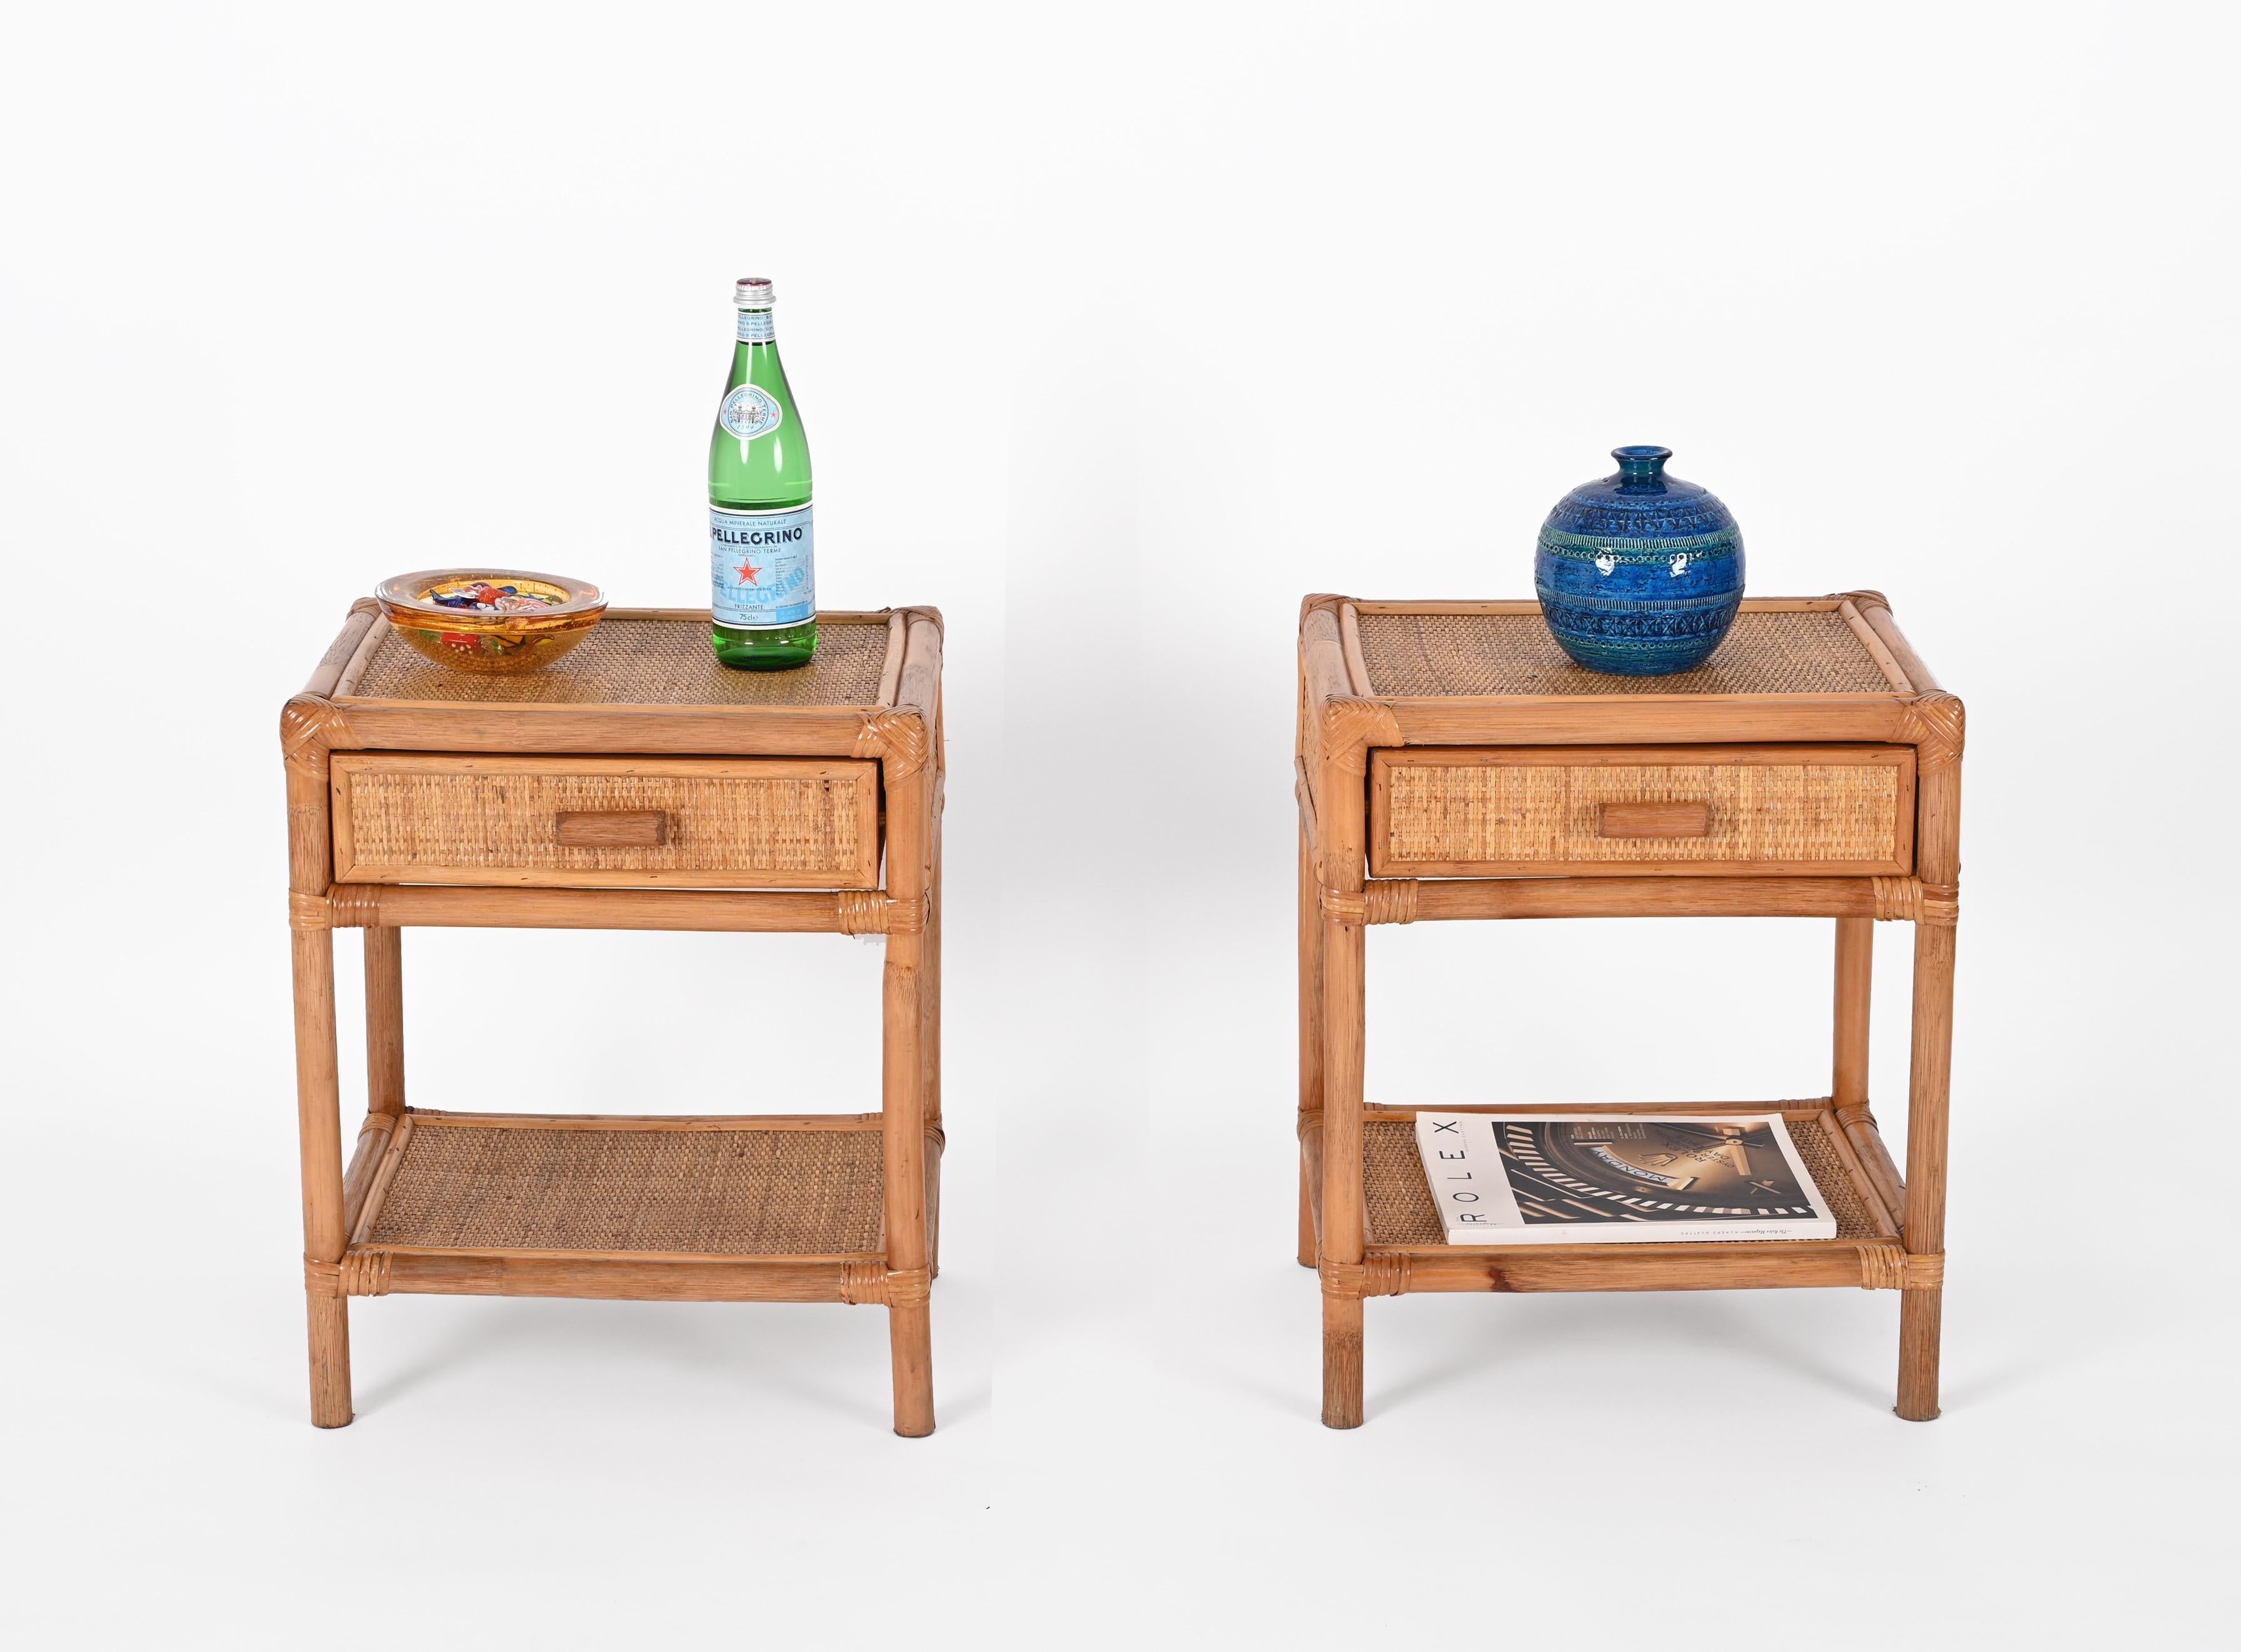 Stunning pair of Mid-Century Modern bamboo and rattan bedside tables. These fantastic pieces were designed in Italy during the 1970s.

The key features of this wonderful set are the beautiful rationalist straight lines, improved by using natural